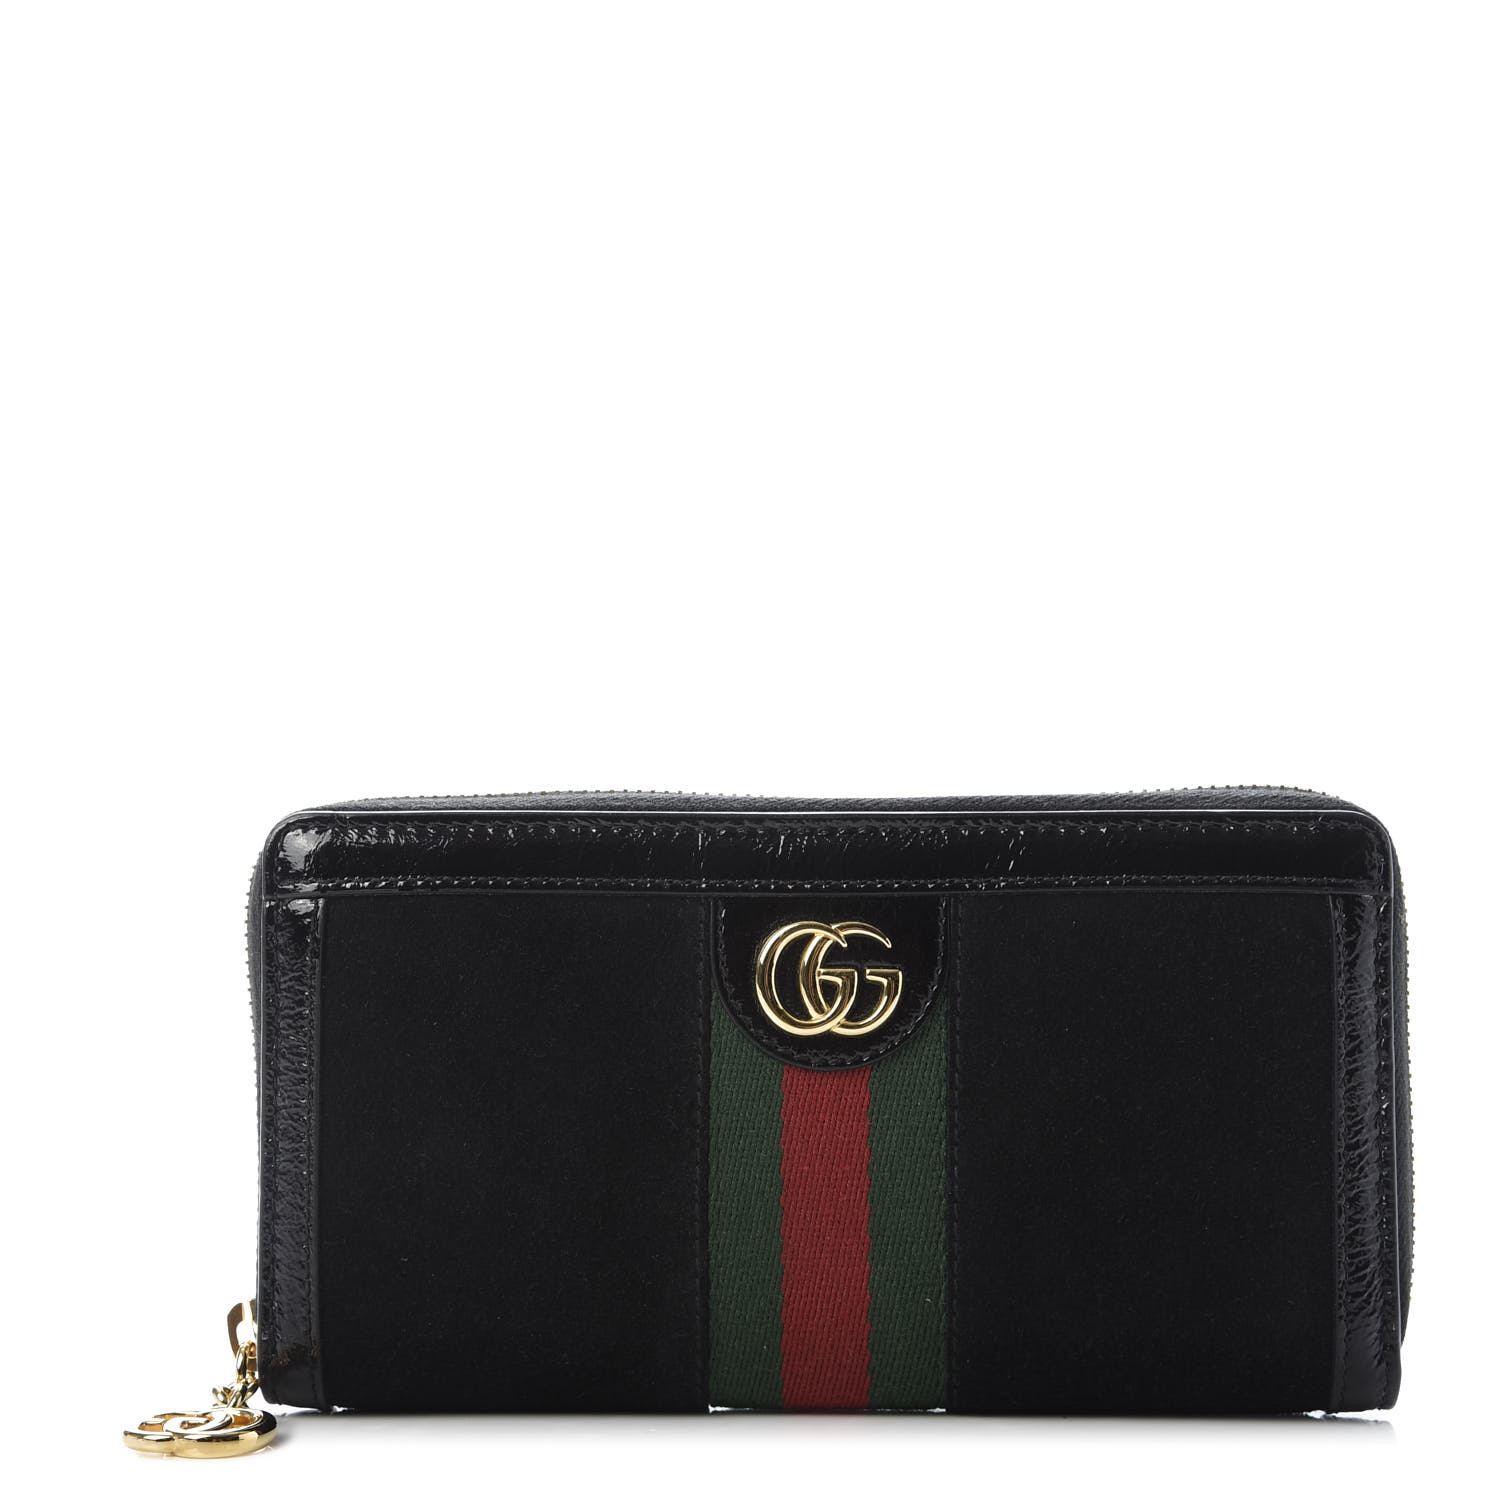 GUCCI Suede Patent GG Web Ophidia Zip Around Wallet Black 677436 ...